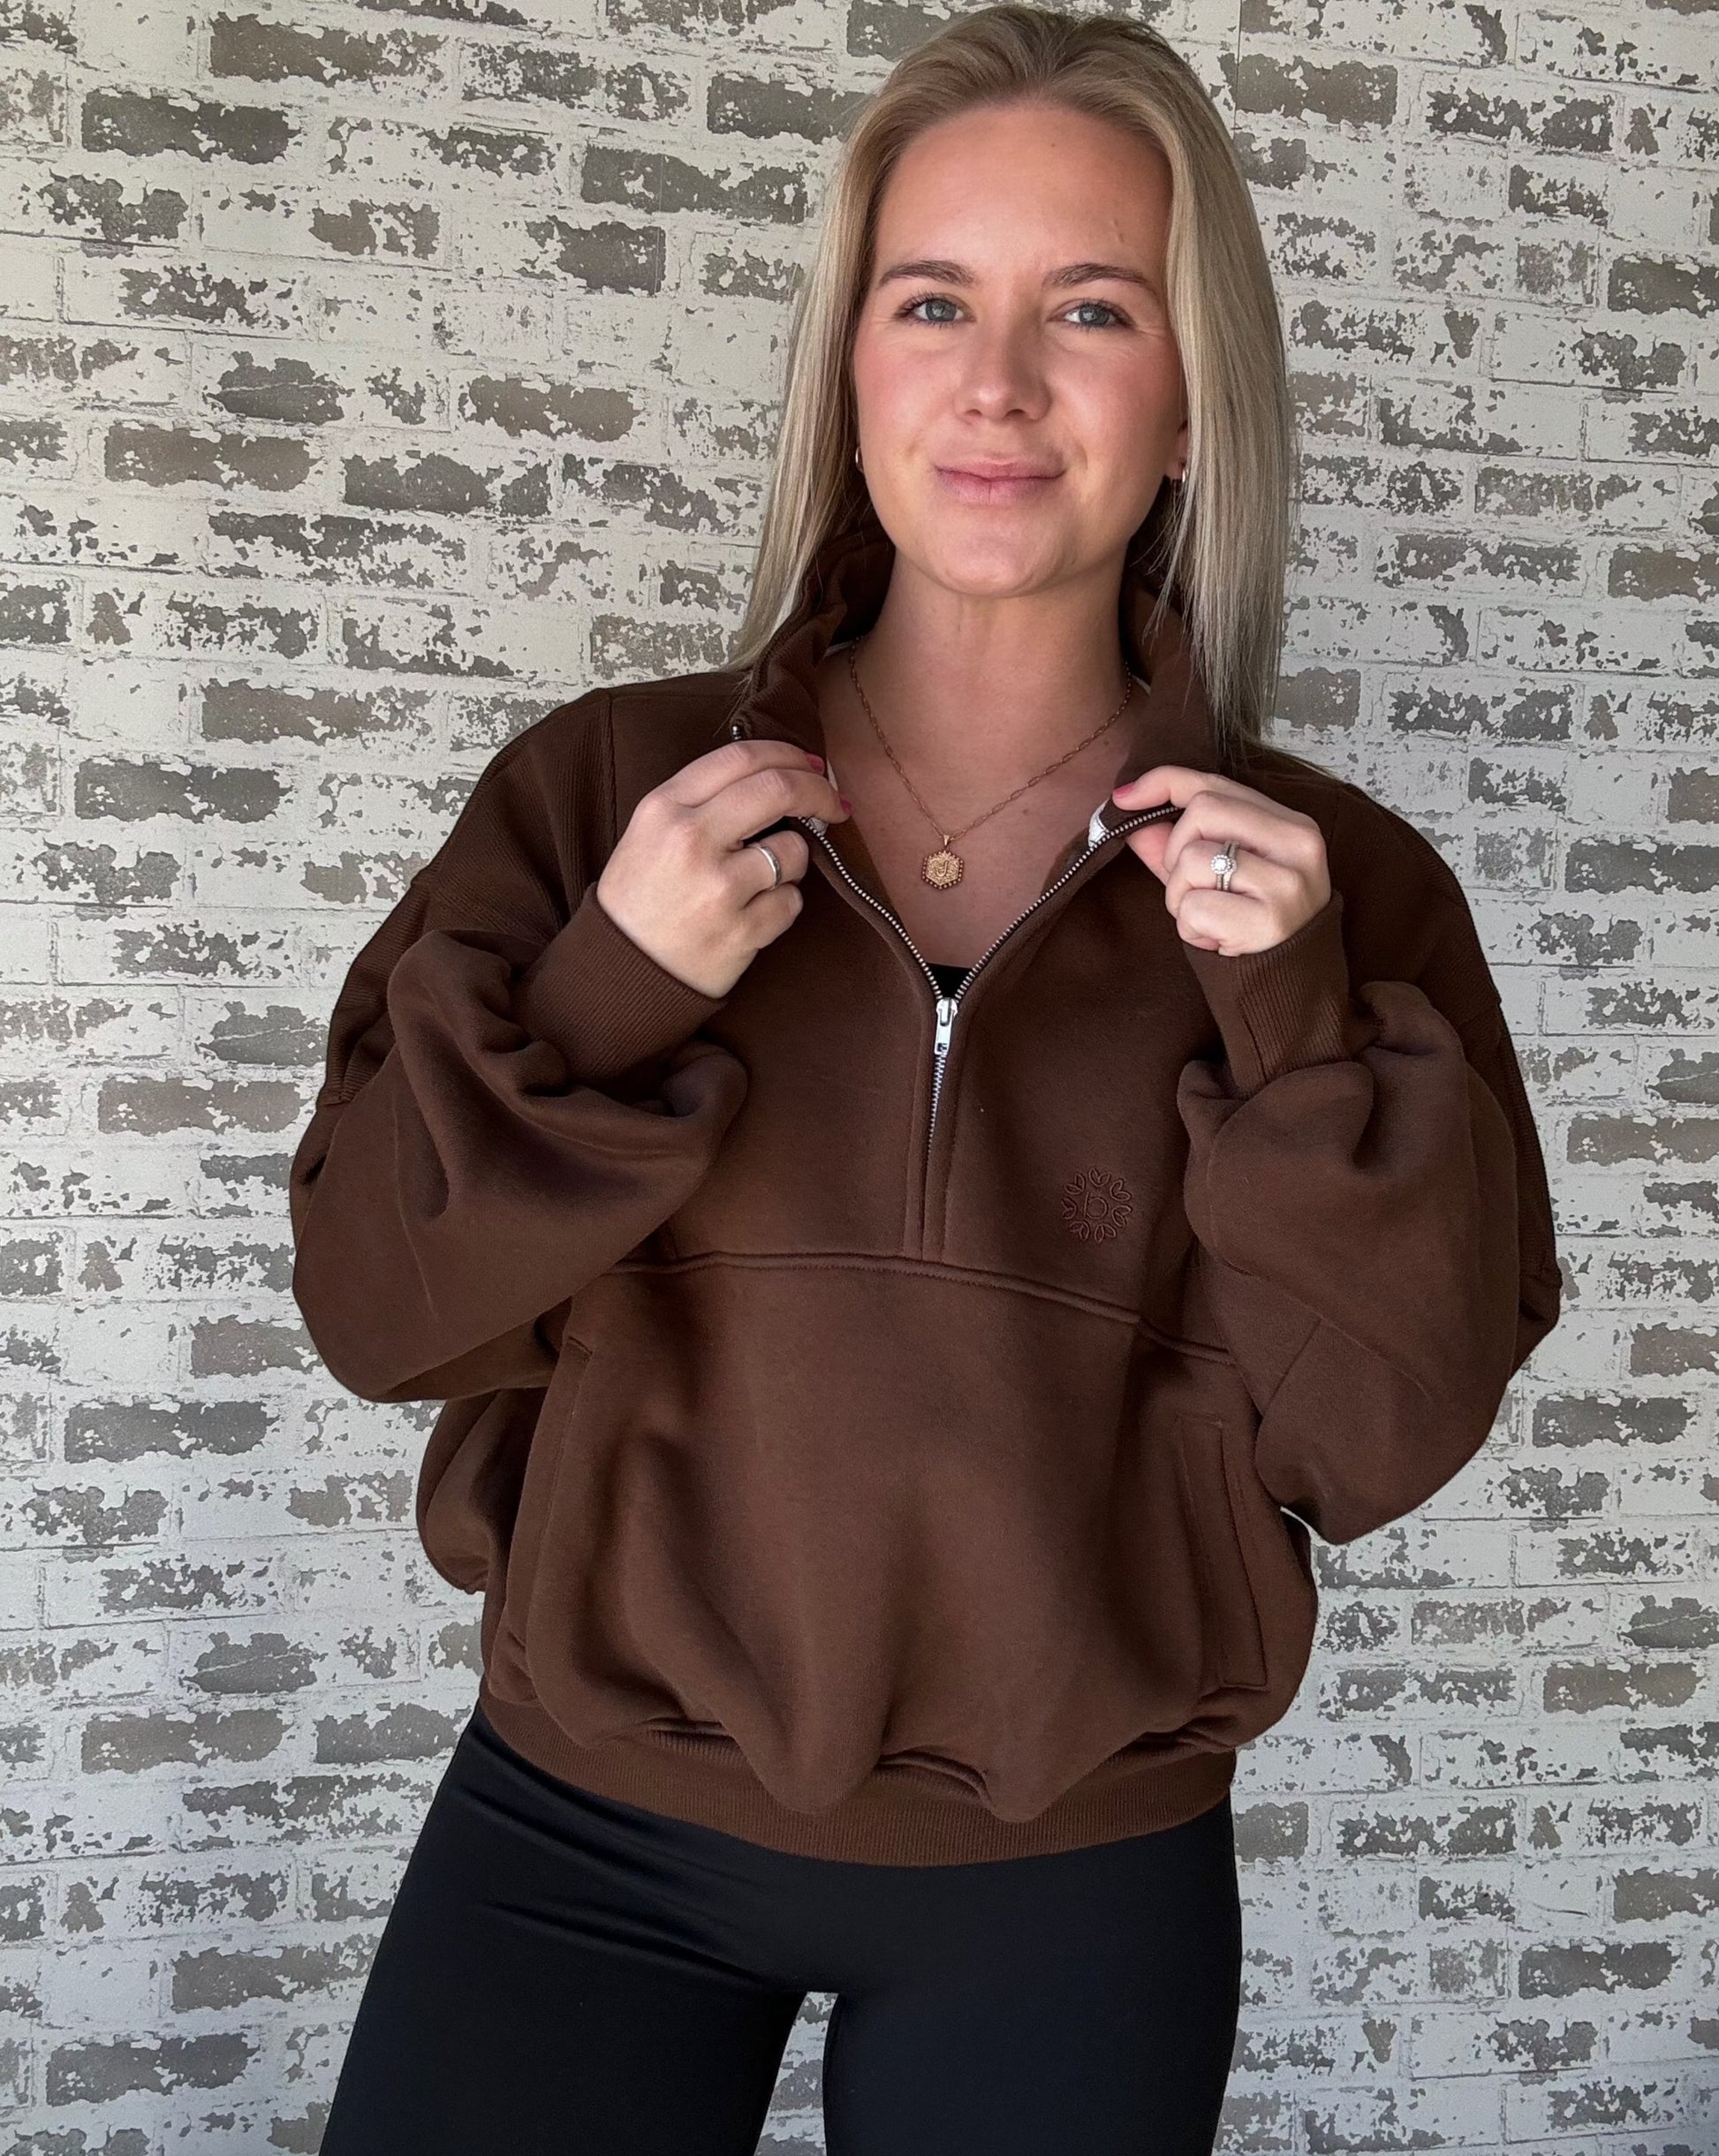 white women wearing an oversized cropped pull over that is a half zip sweater.  She is standing in front of a brick wall